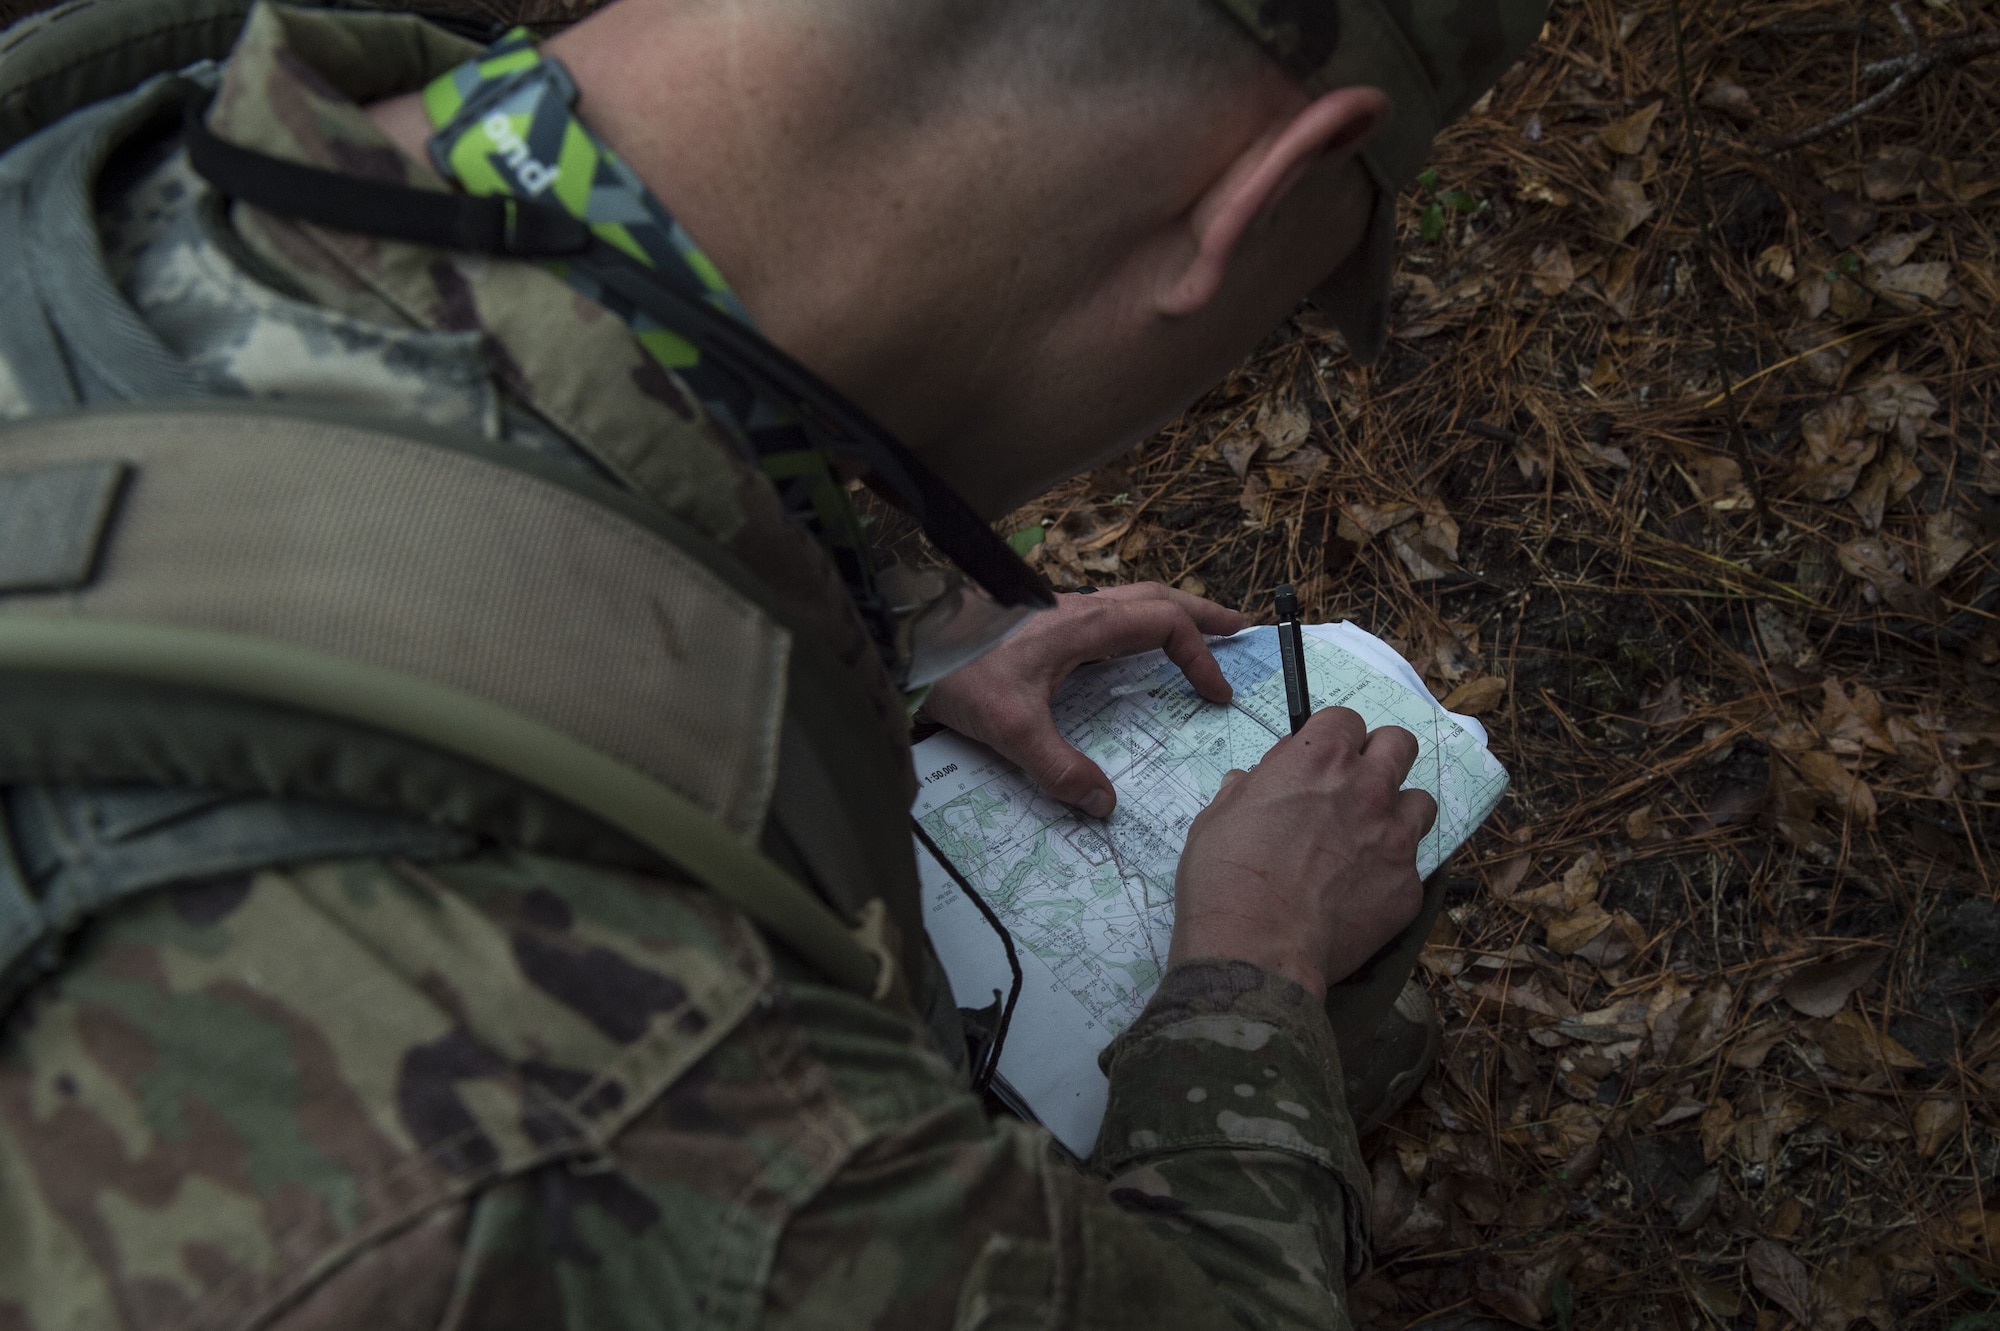 An Airman uses a protractor to calculate distance during a Pre Ranger Assessment Course, Feb. 10, 2018, at Moody Air Force Base, Ga. The three-day assessment is designed to determine whether Airmen are ready to attend the Air Force Ranger Assessment Course held at Fort Bliss Army Post, Texas. Ranger cadre test Airmen’s physical fitness, tactical abilities, land navigation skills, leadership qualities, water confidence and academic ability to determine if they have the knowledge and will to become Rangers. (U.S. Air Force photo by Senior Airman Janiqua P. Robinson)